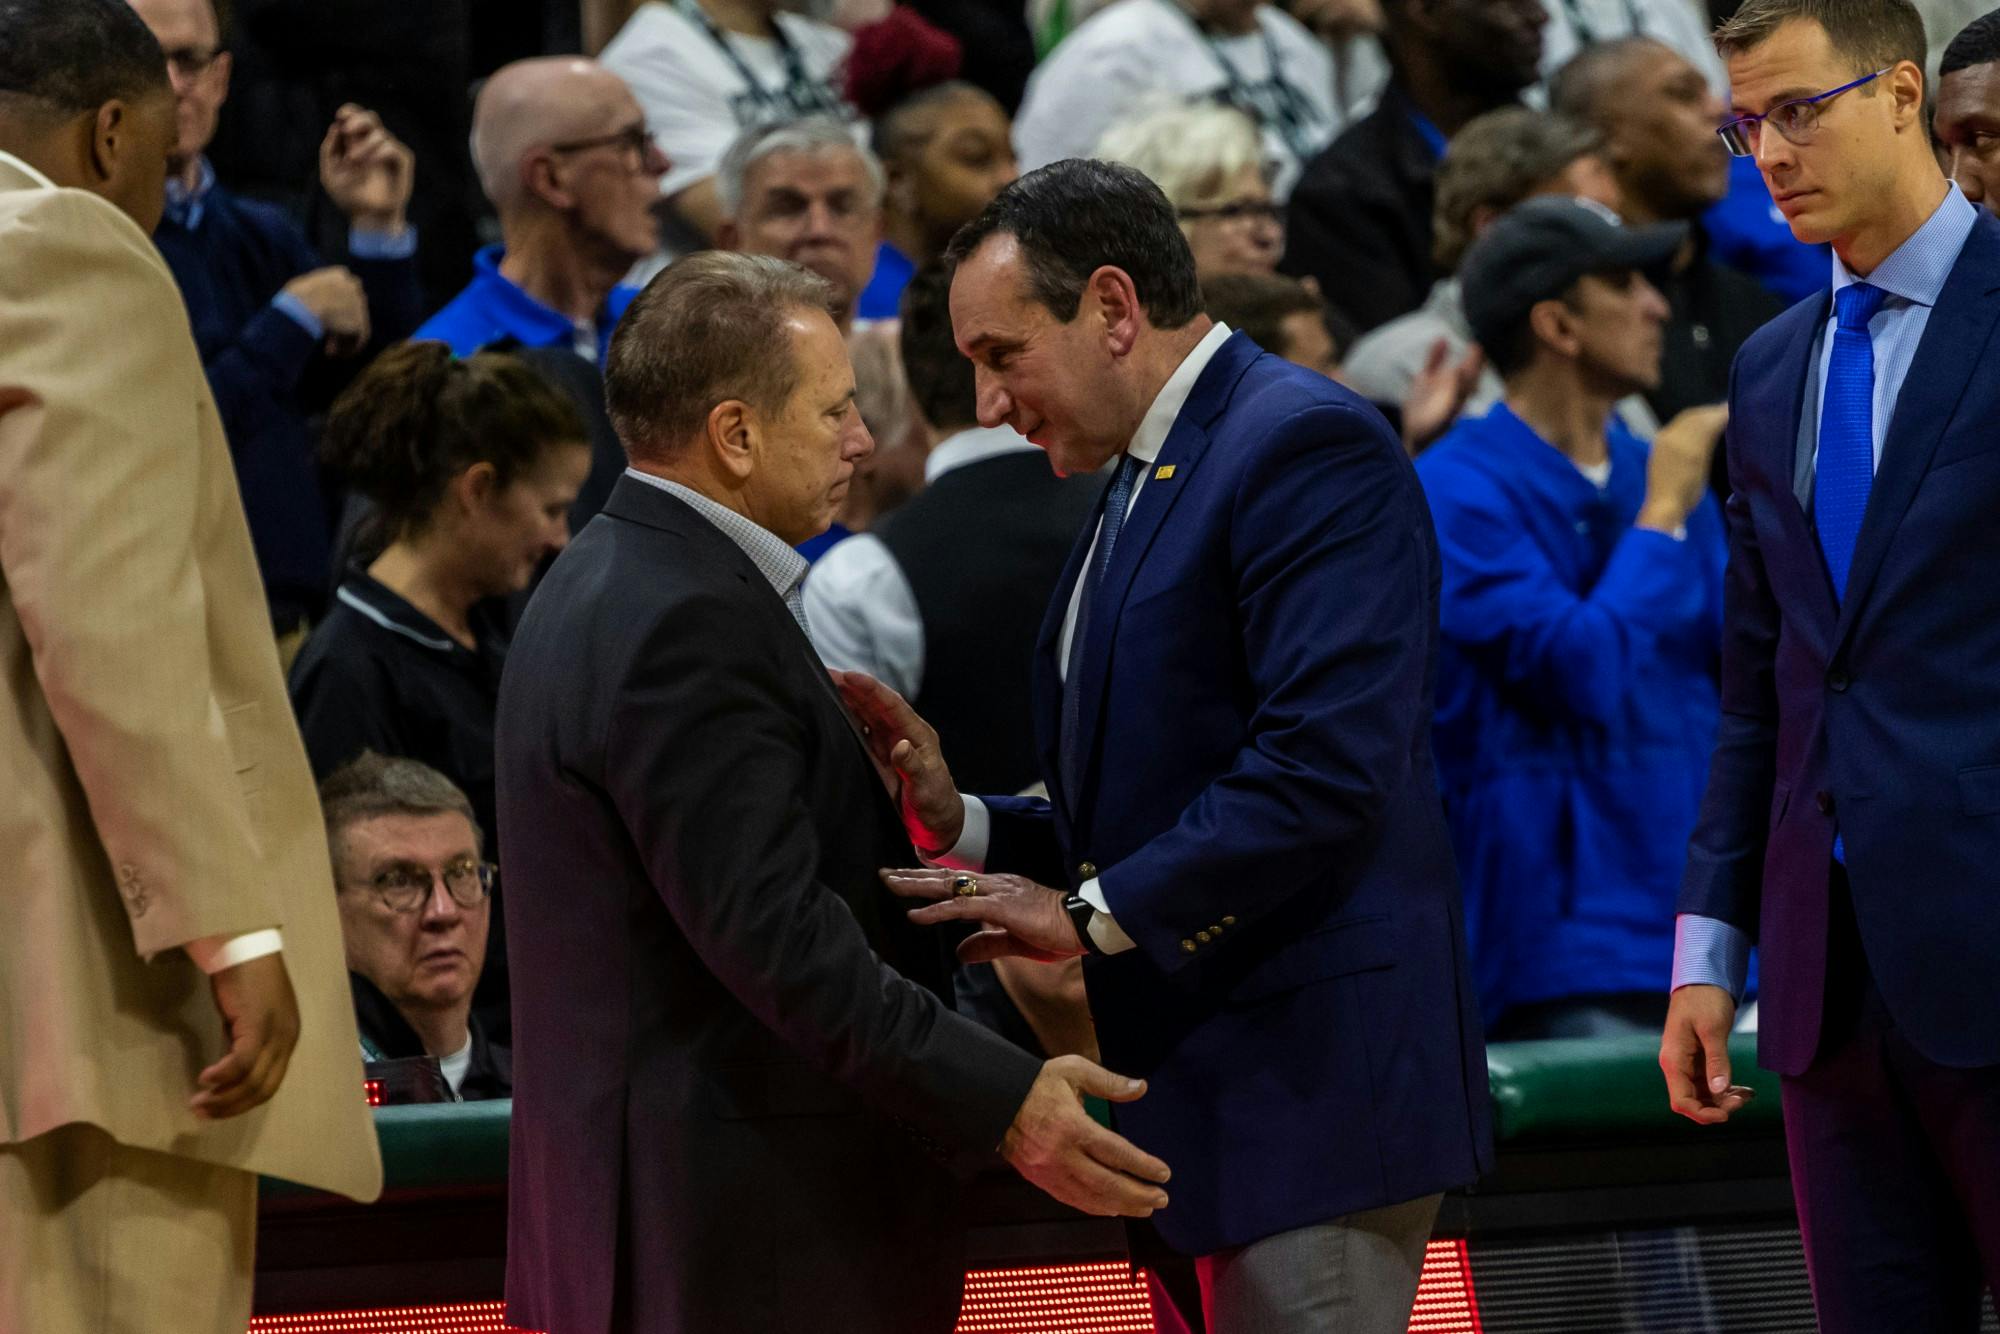 <p>MSU Head Coach Tom Izzo (left) and Duke Head Coach Mike Krzyzewski interact following Duke defeating MSU. The Blue Devils defeated the Spartans, 87-75, at the Breslin Student Events Center on Dec. 3, 2019. </p>